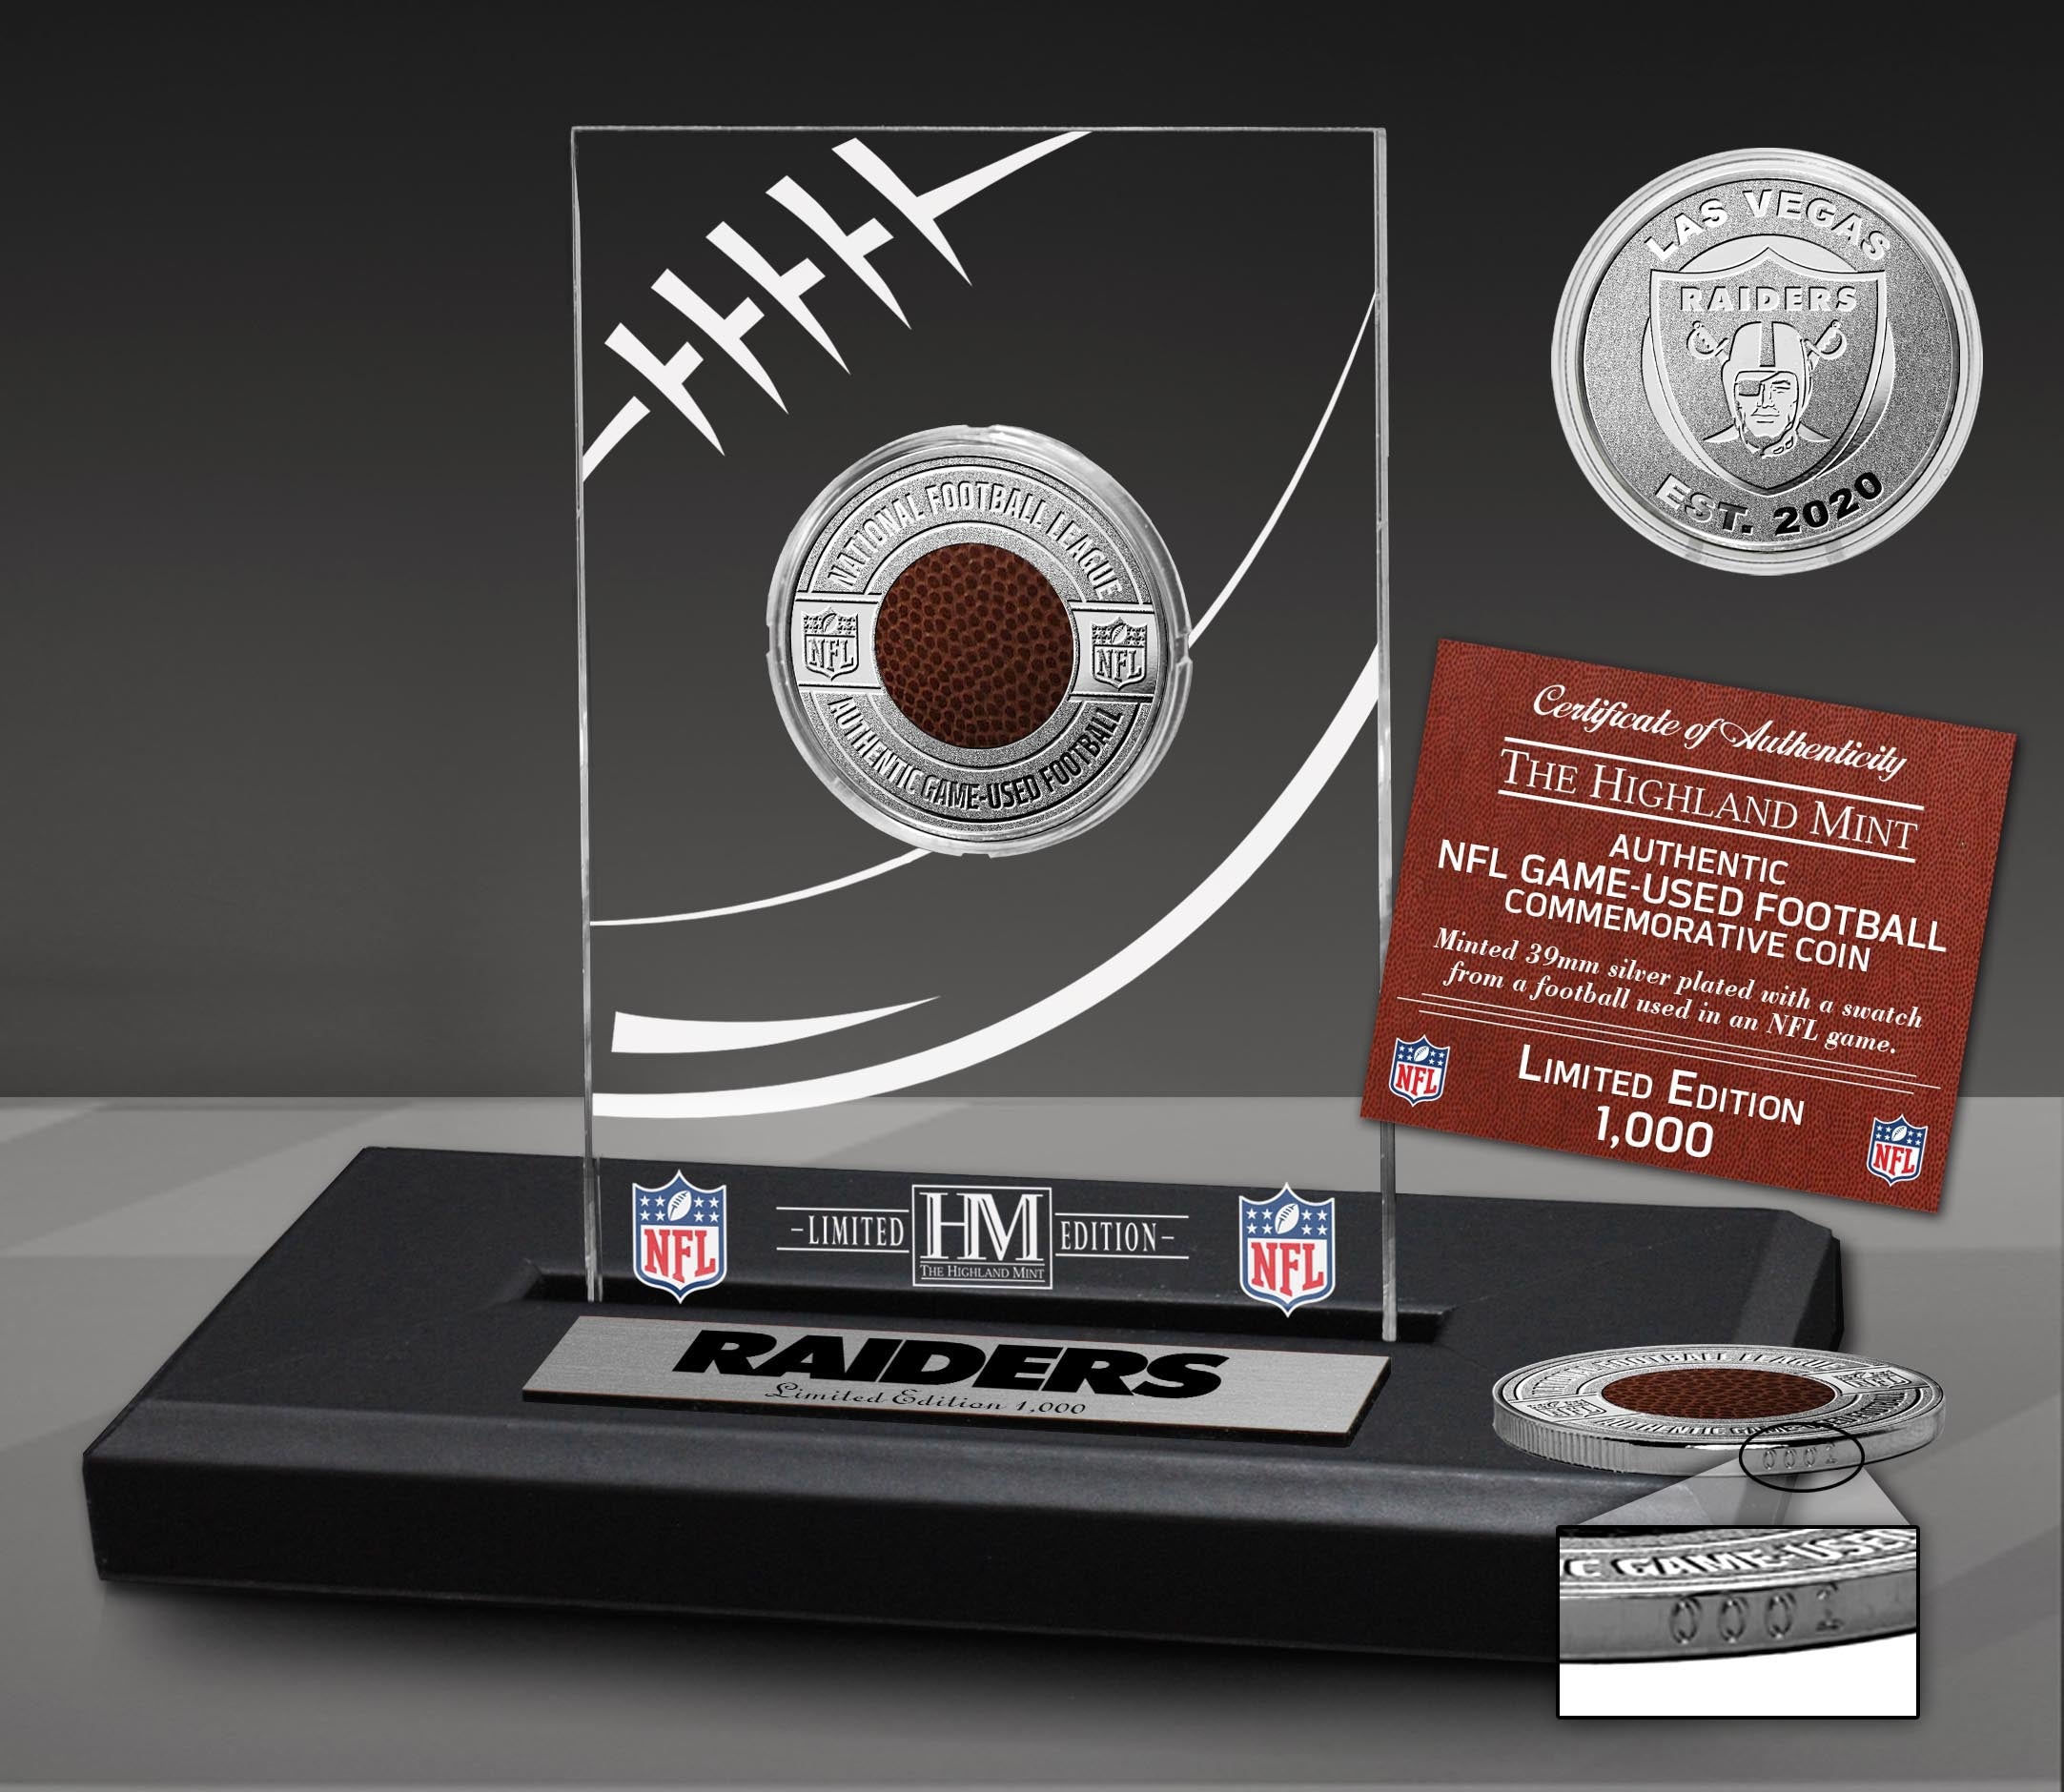 Las Vegas Raiders Game Used NFL Football Silver Plated Coin in Commemorative Display